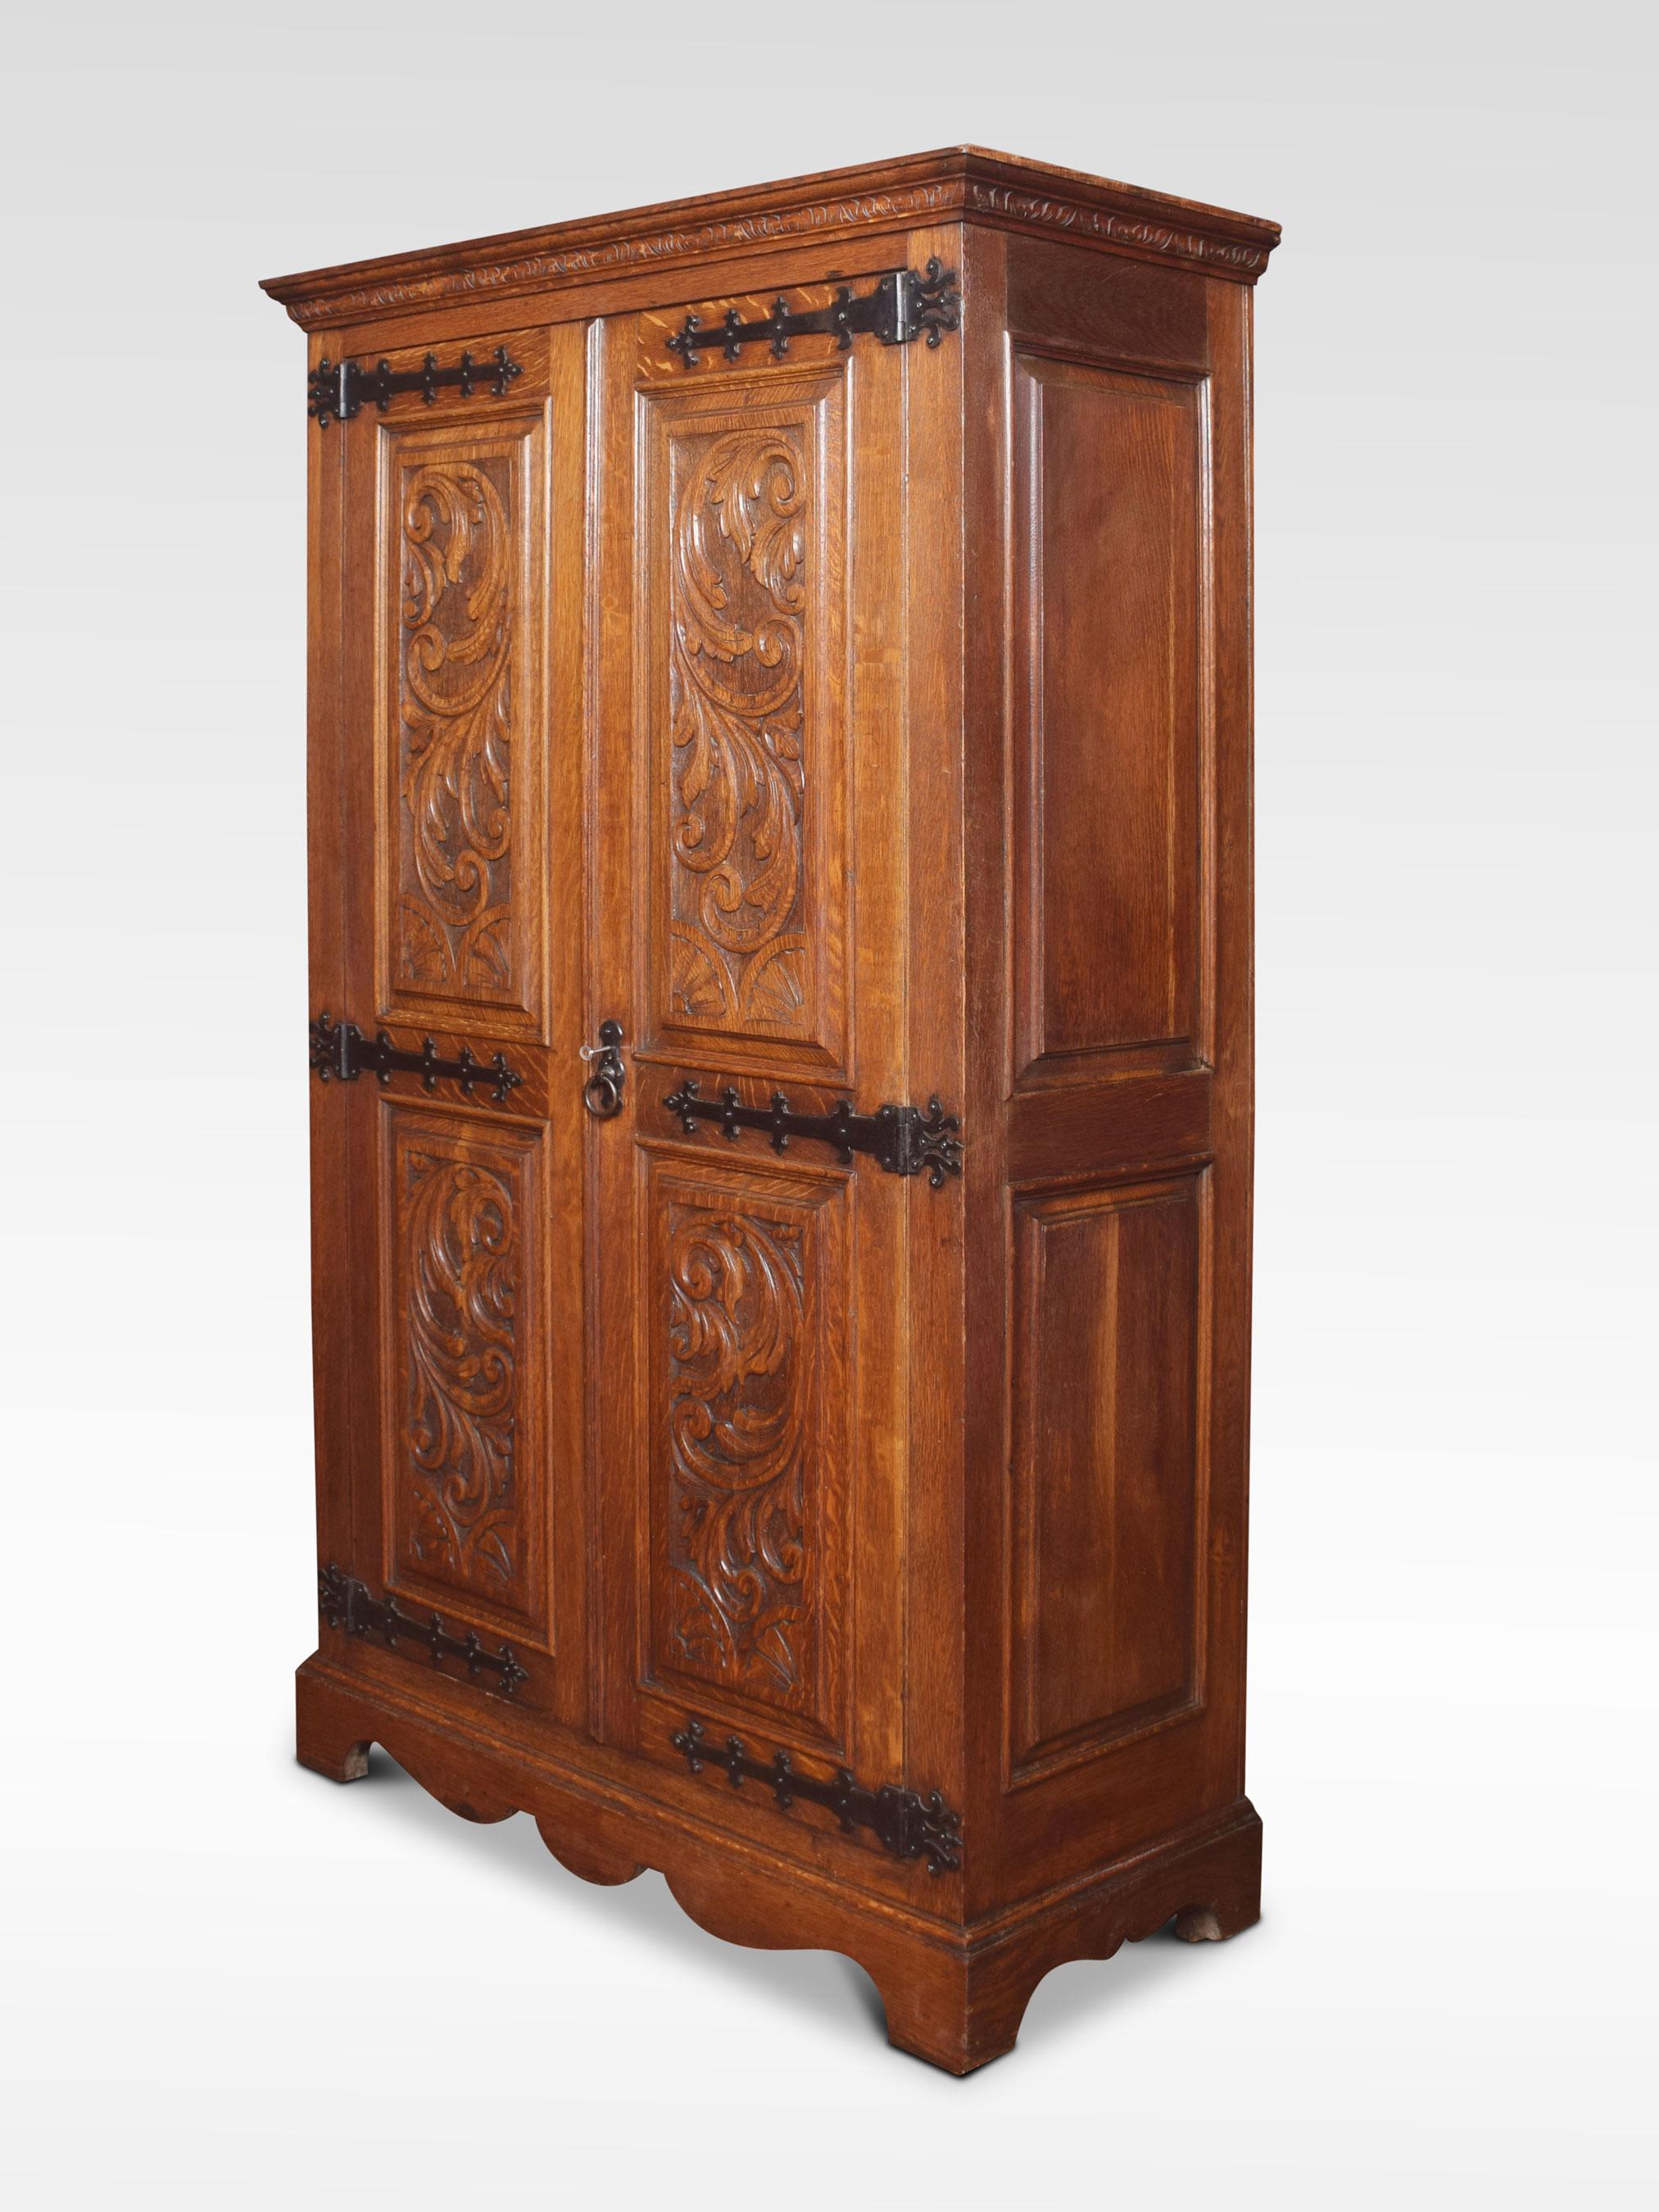 Carved oak two-door wardrobe the projecting cornice above two carved paneled doors with scrolling foliage and original strapwork hinges. The large doors opening to reveal a hanging area. All raised up on bracket feet.
Dimensions:
Height 71